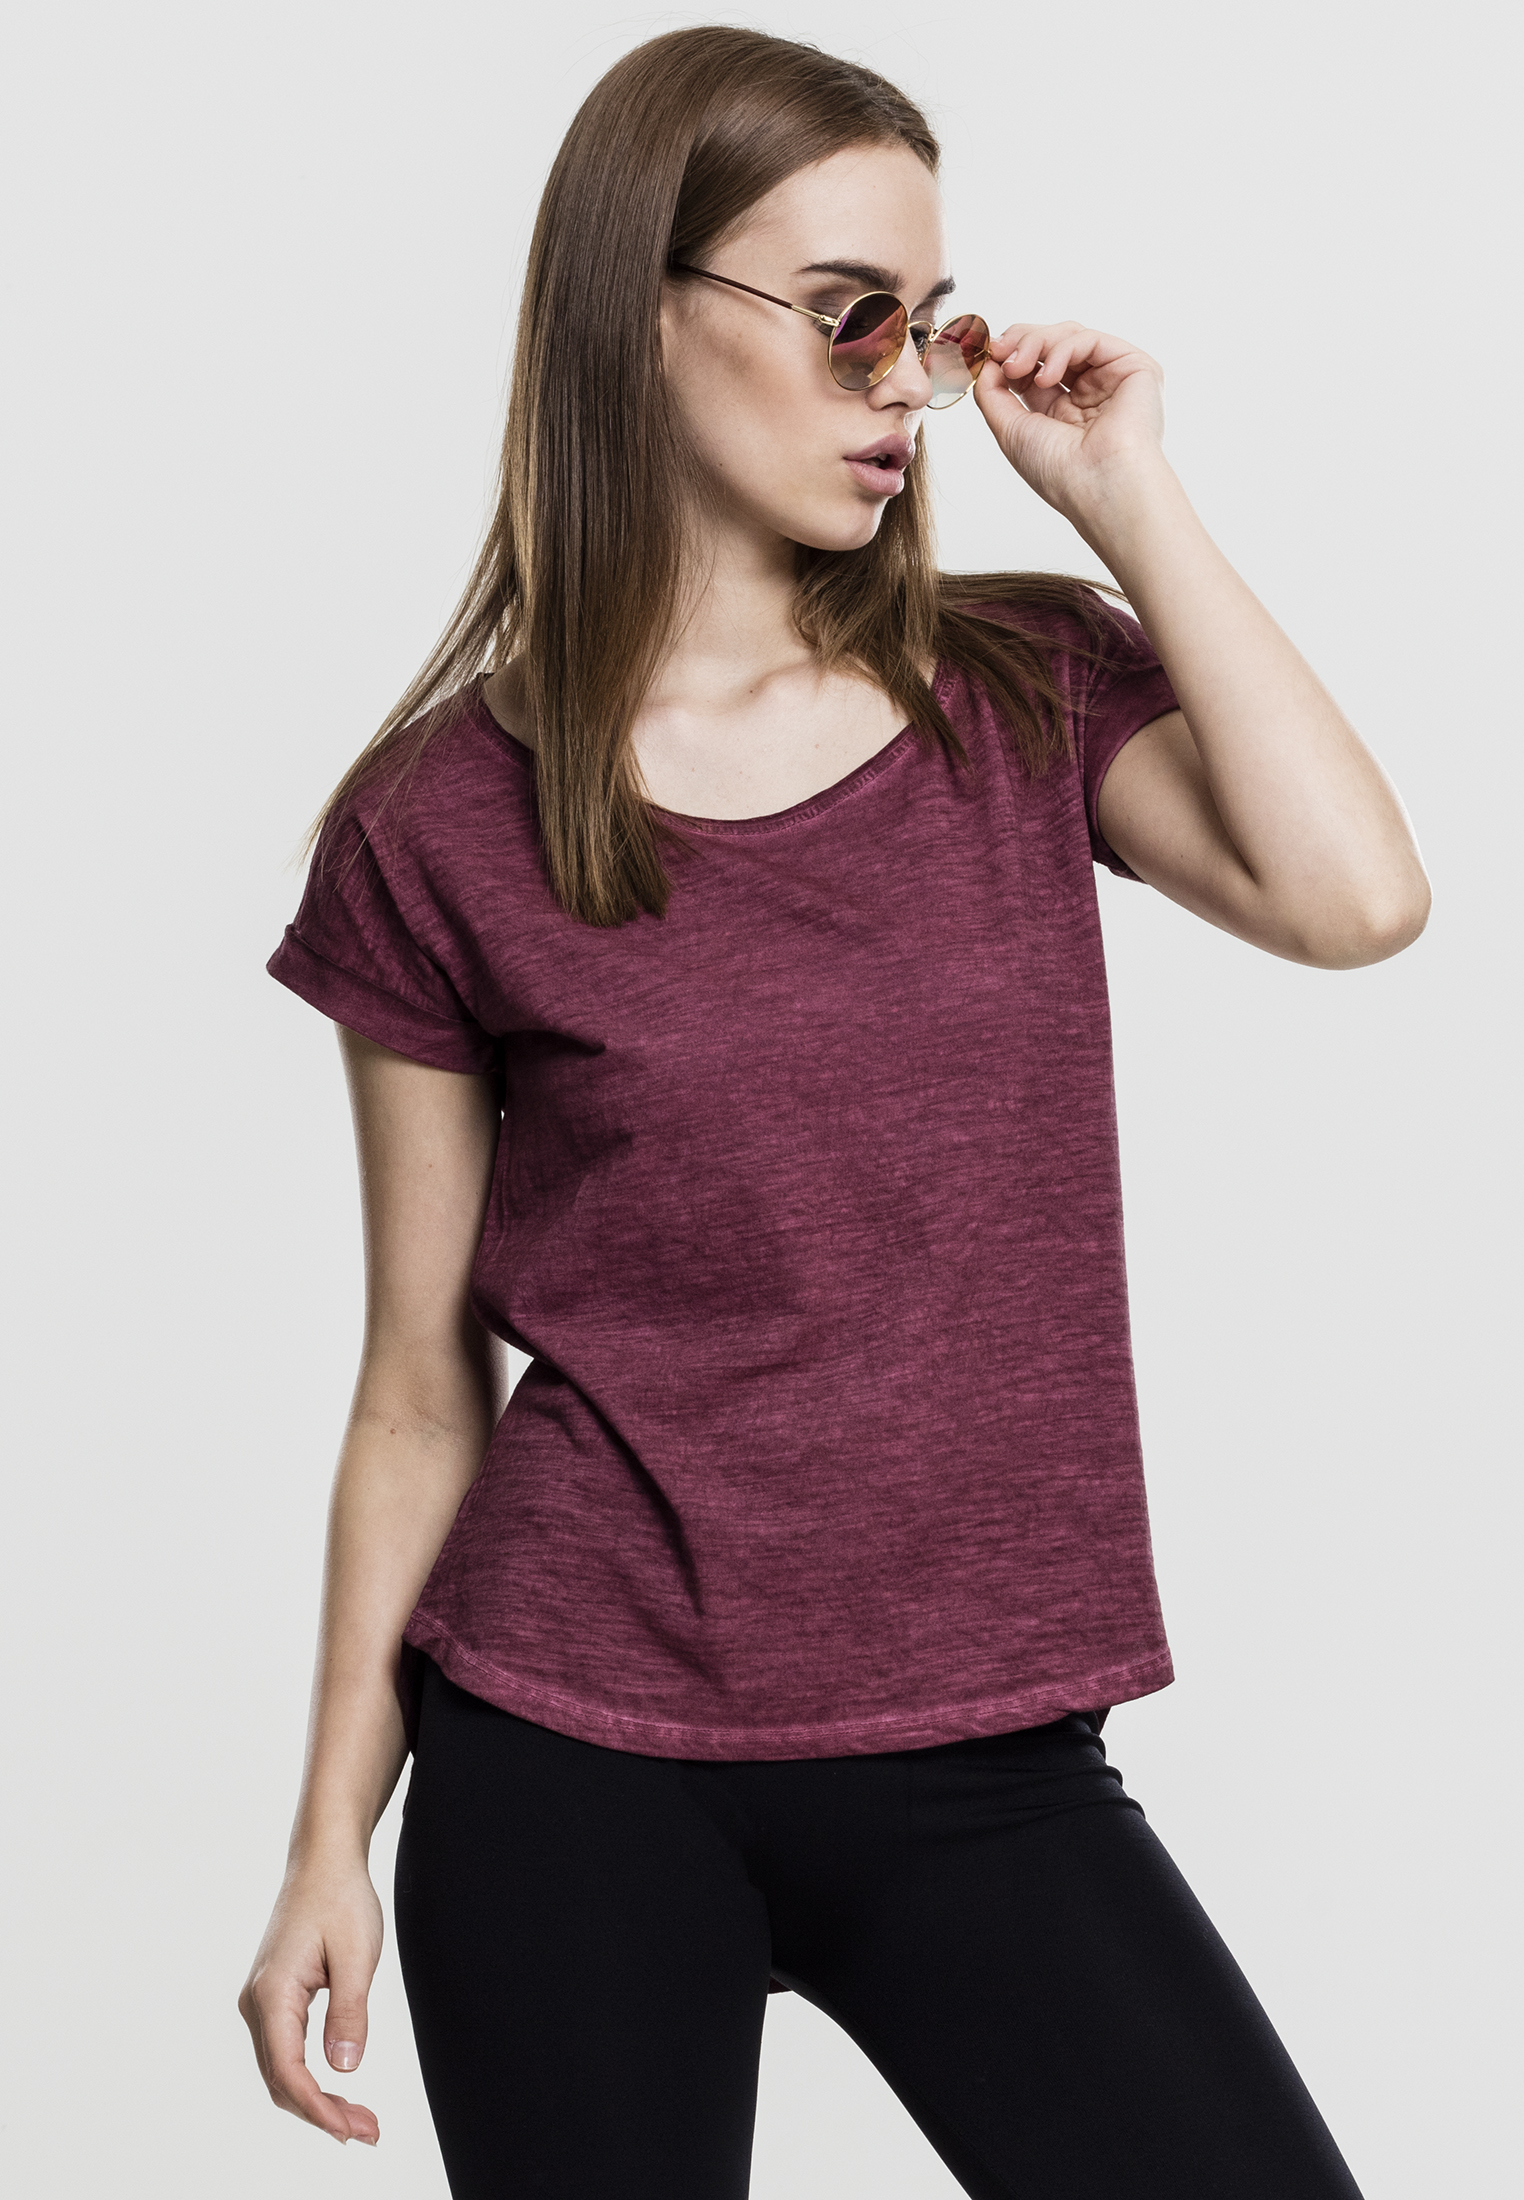 Women's Long-back T-shirt In The Shape Of A Spray With Burgundy Color